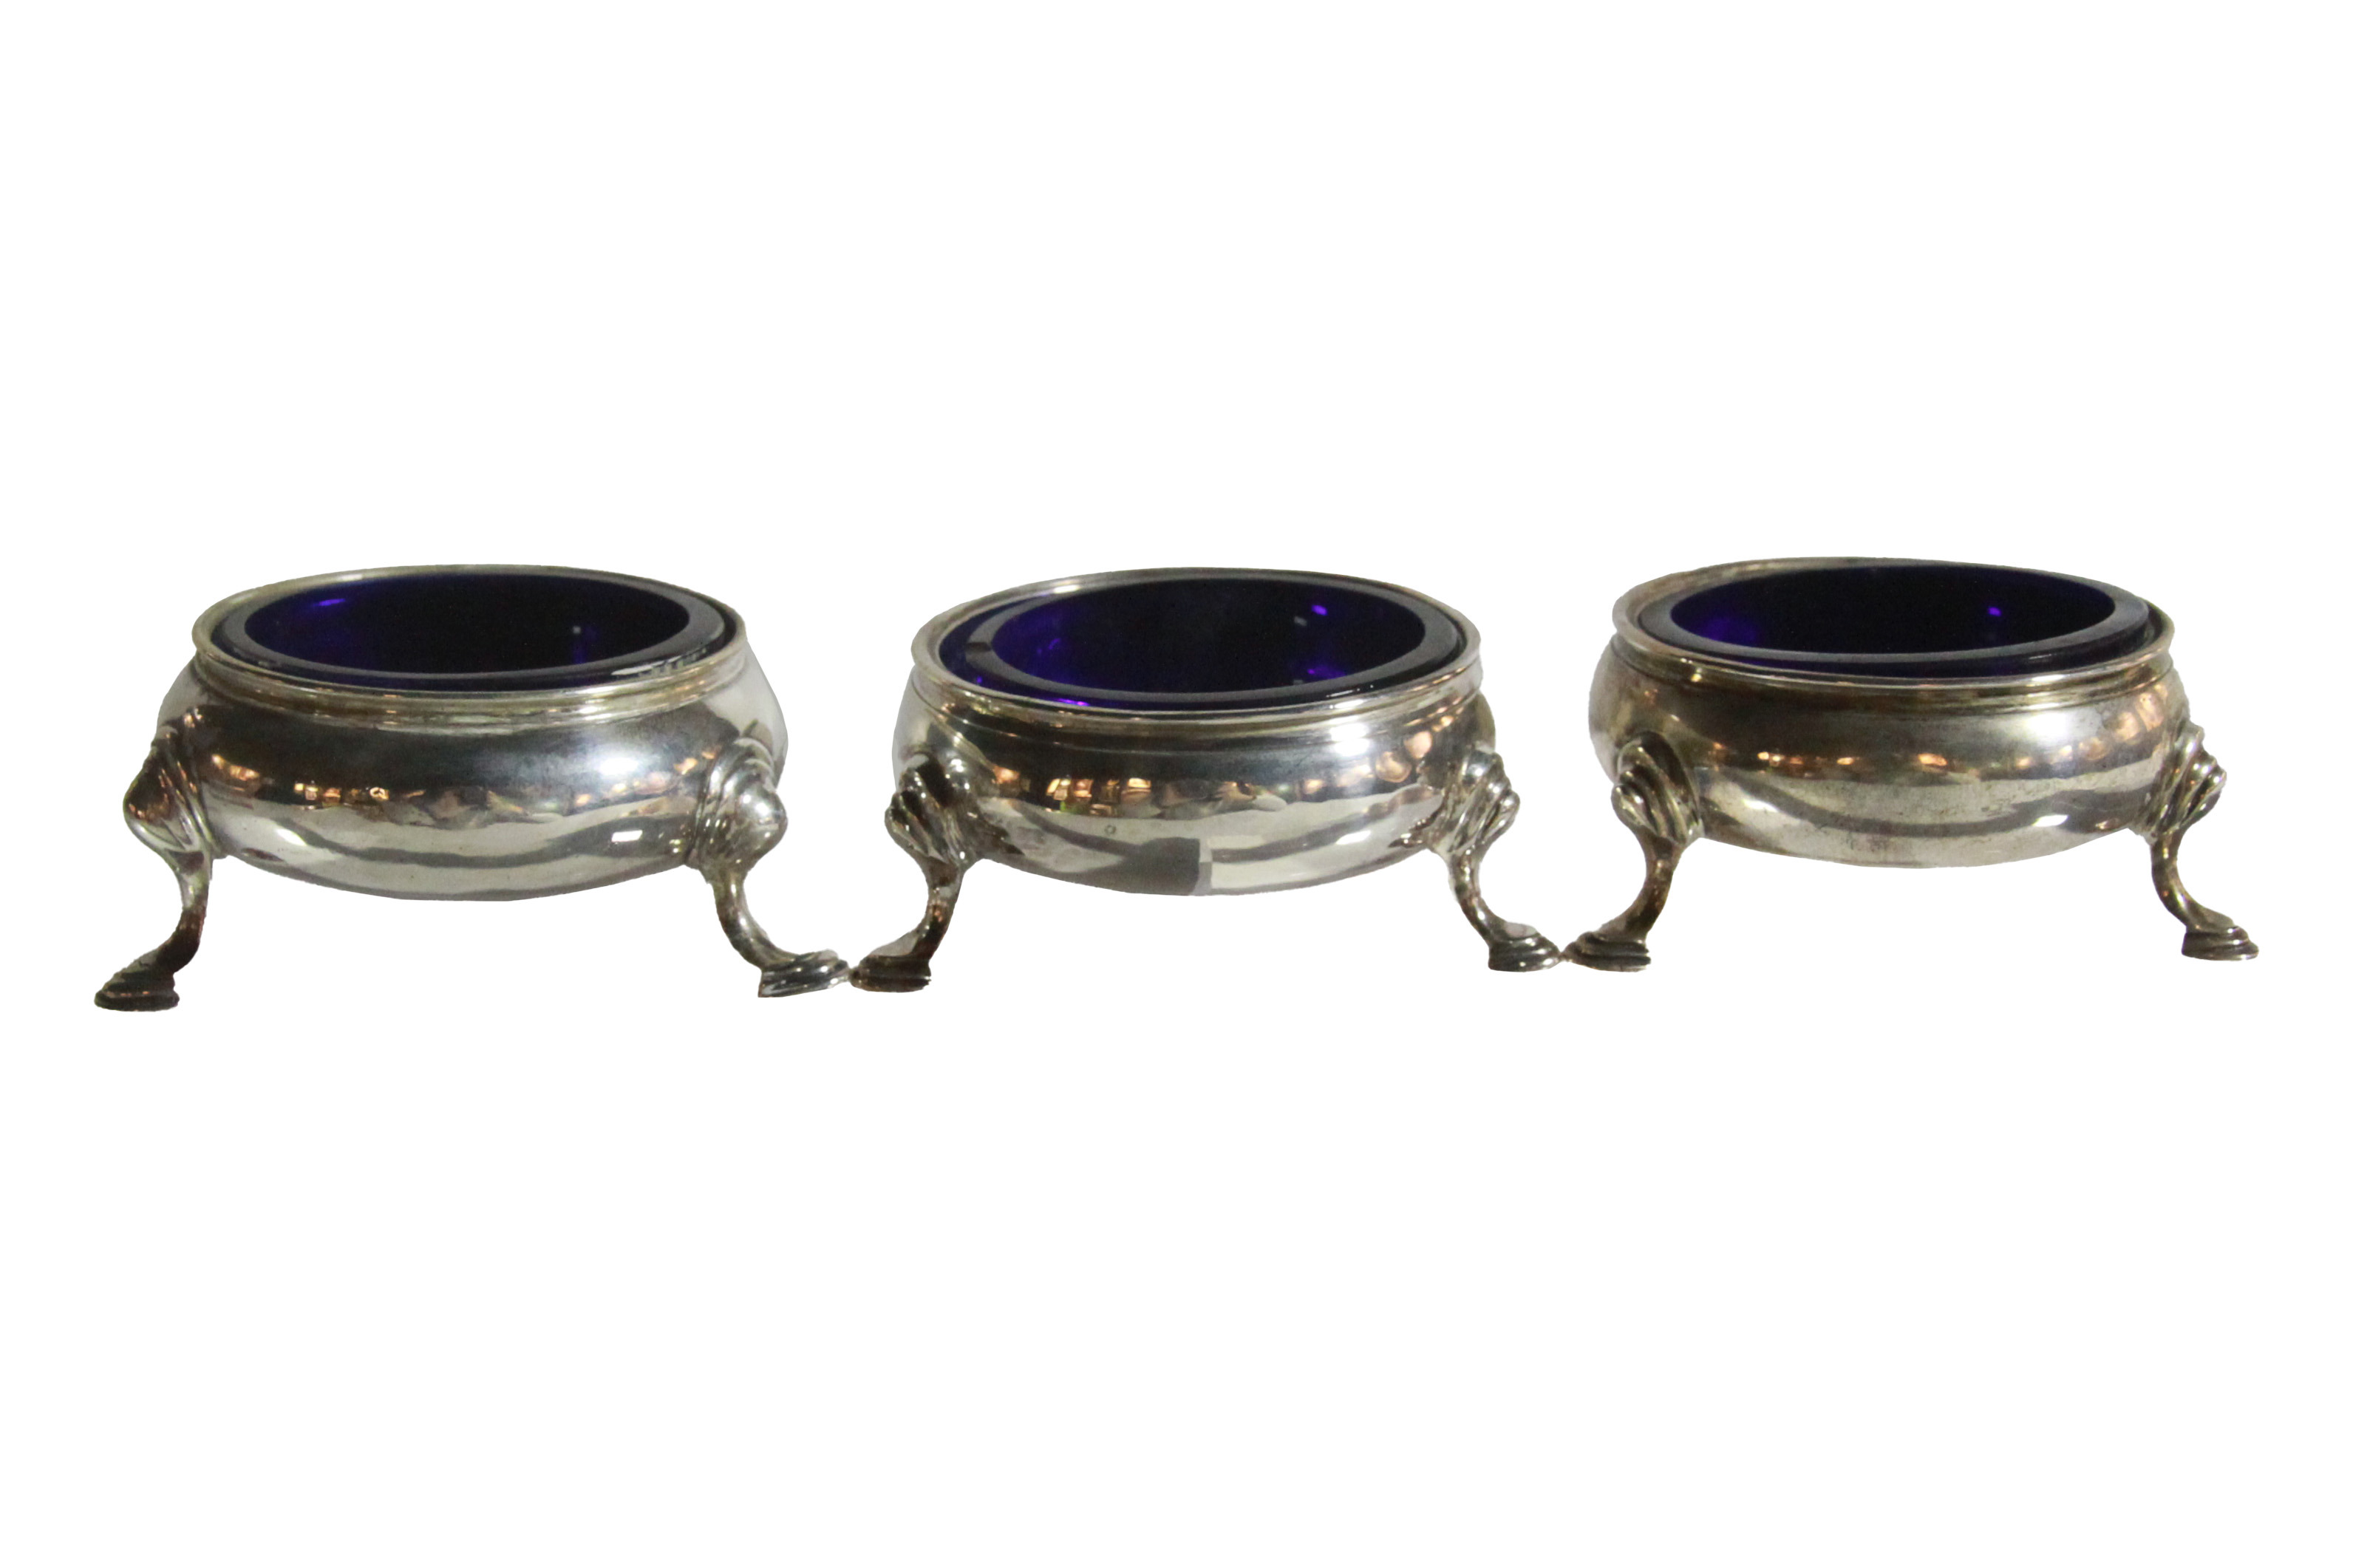 A set of 3 silver salts & liners, Thomas Street in London, 1808-1809, (2.9 oz)